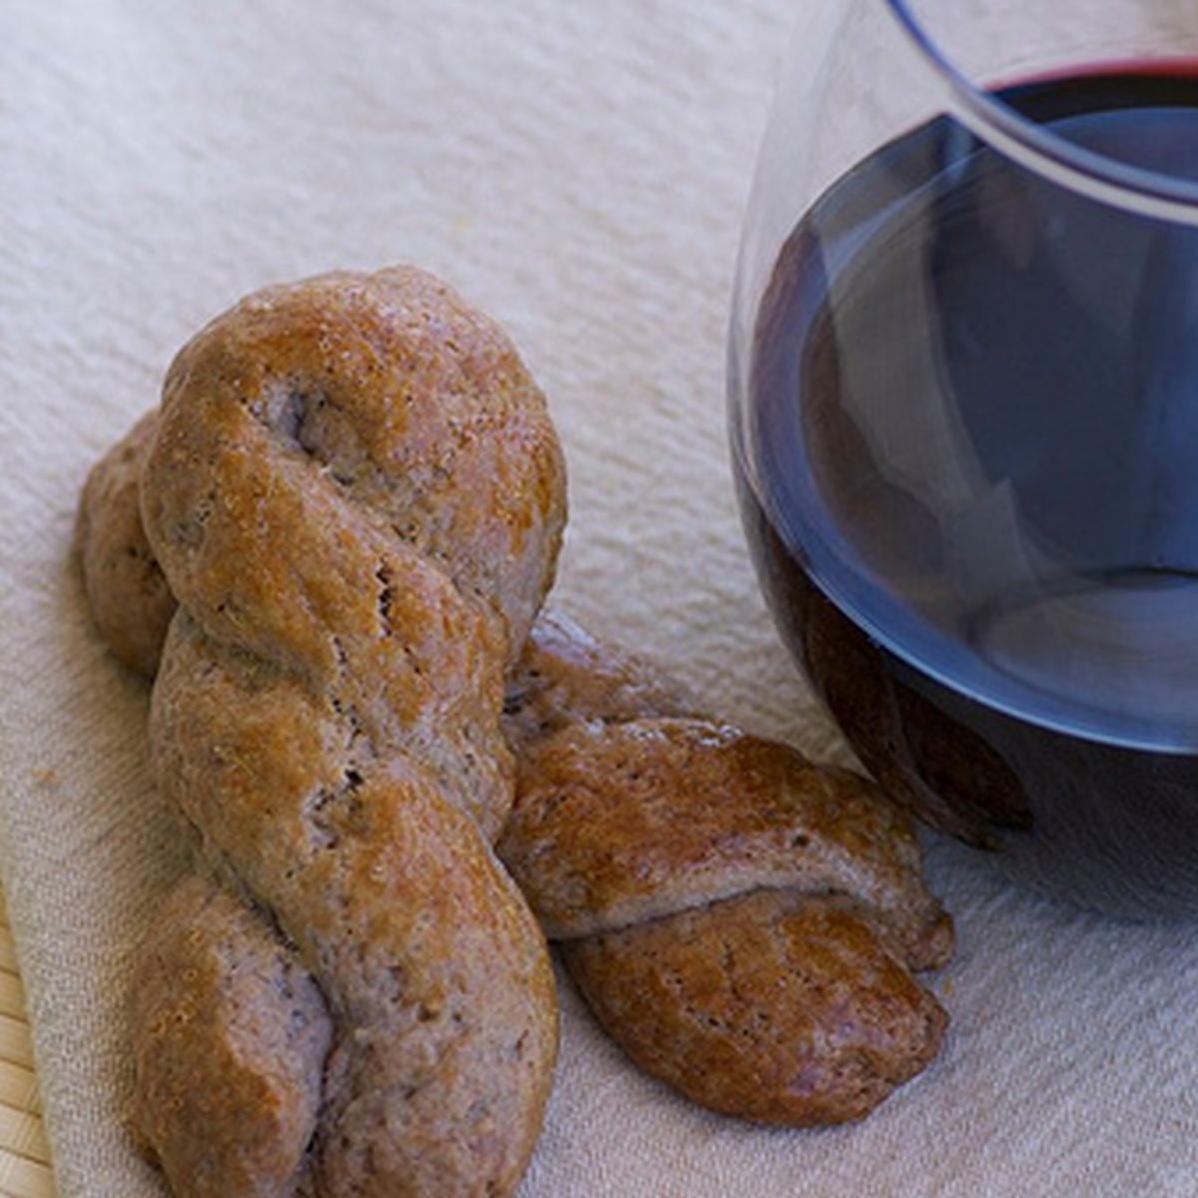  Enjoy these crispy and buttery Italian Wine Biscuits with a glass of Chianti! 🍷🍪